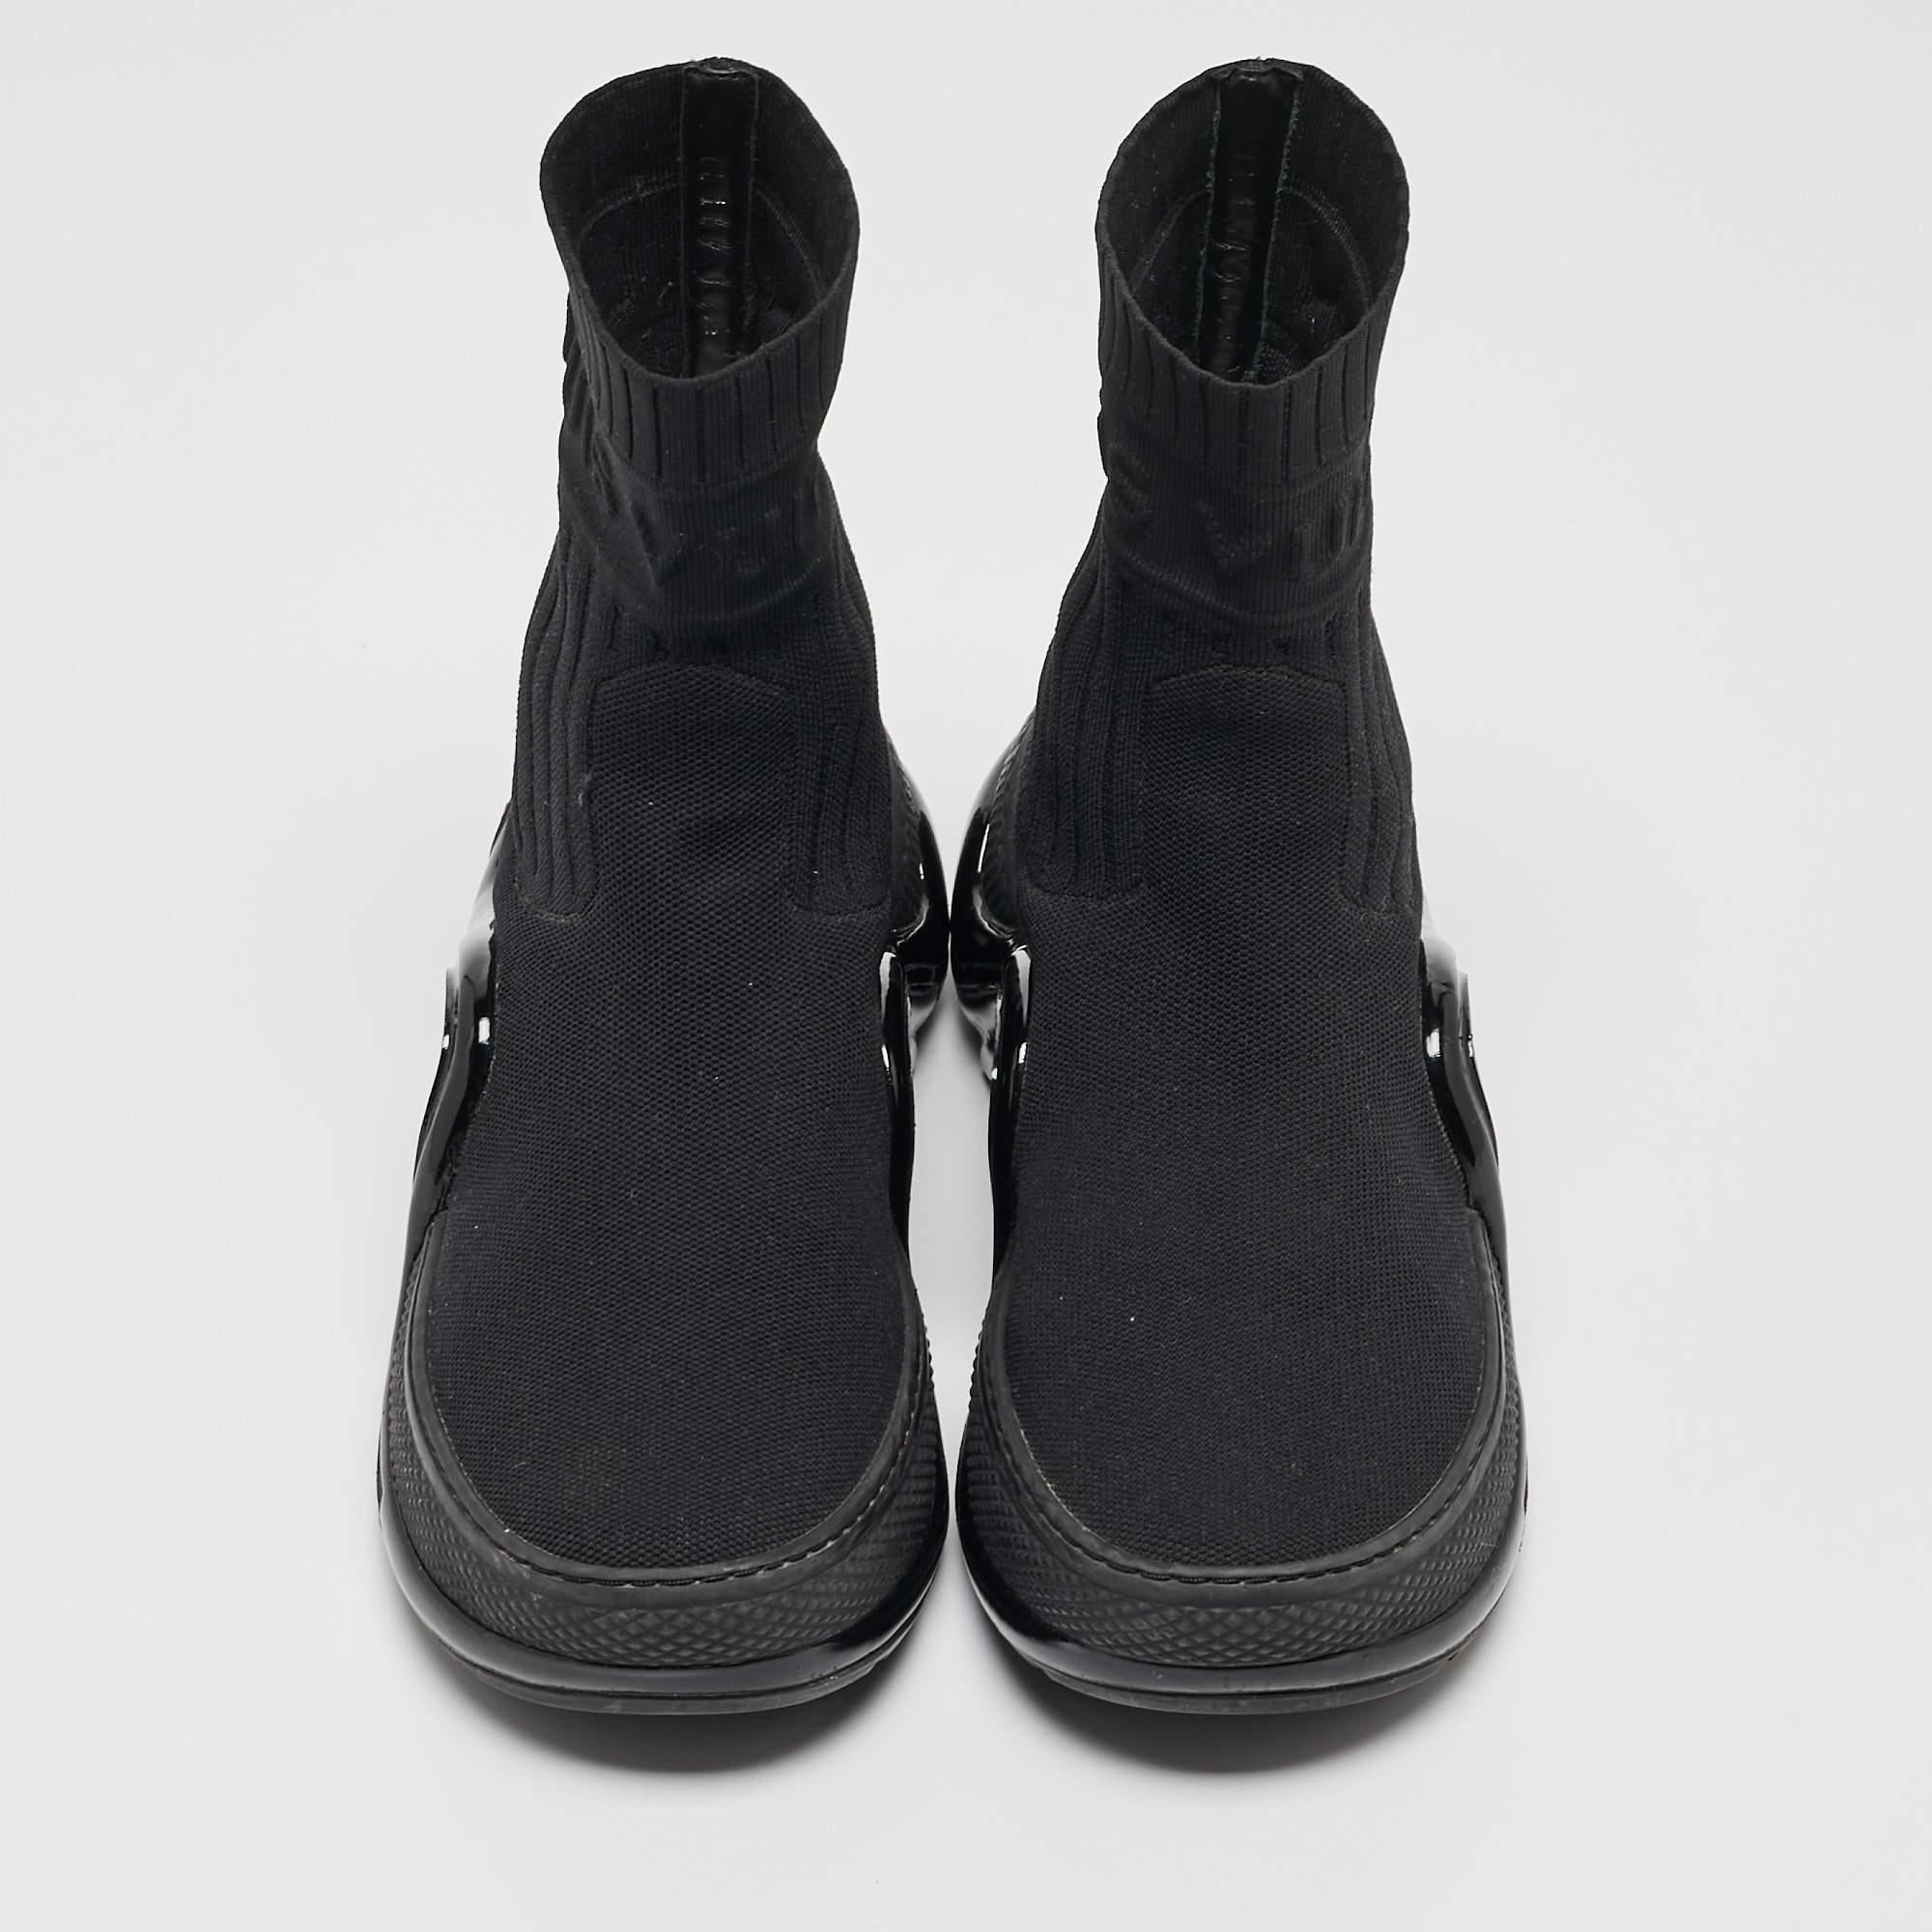 The Louis Vuitton Archlight sneakers effortlessly blend luxury and street style. Crafted with precision, the sleek black knit fabric exudes sophistication. The iconic Archlight sole adds a modern edge, ensuring a fashion-forward statement piece that